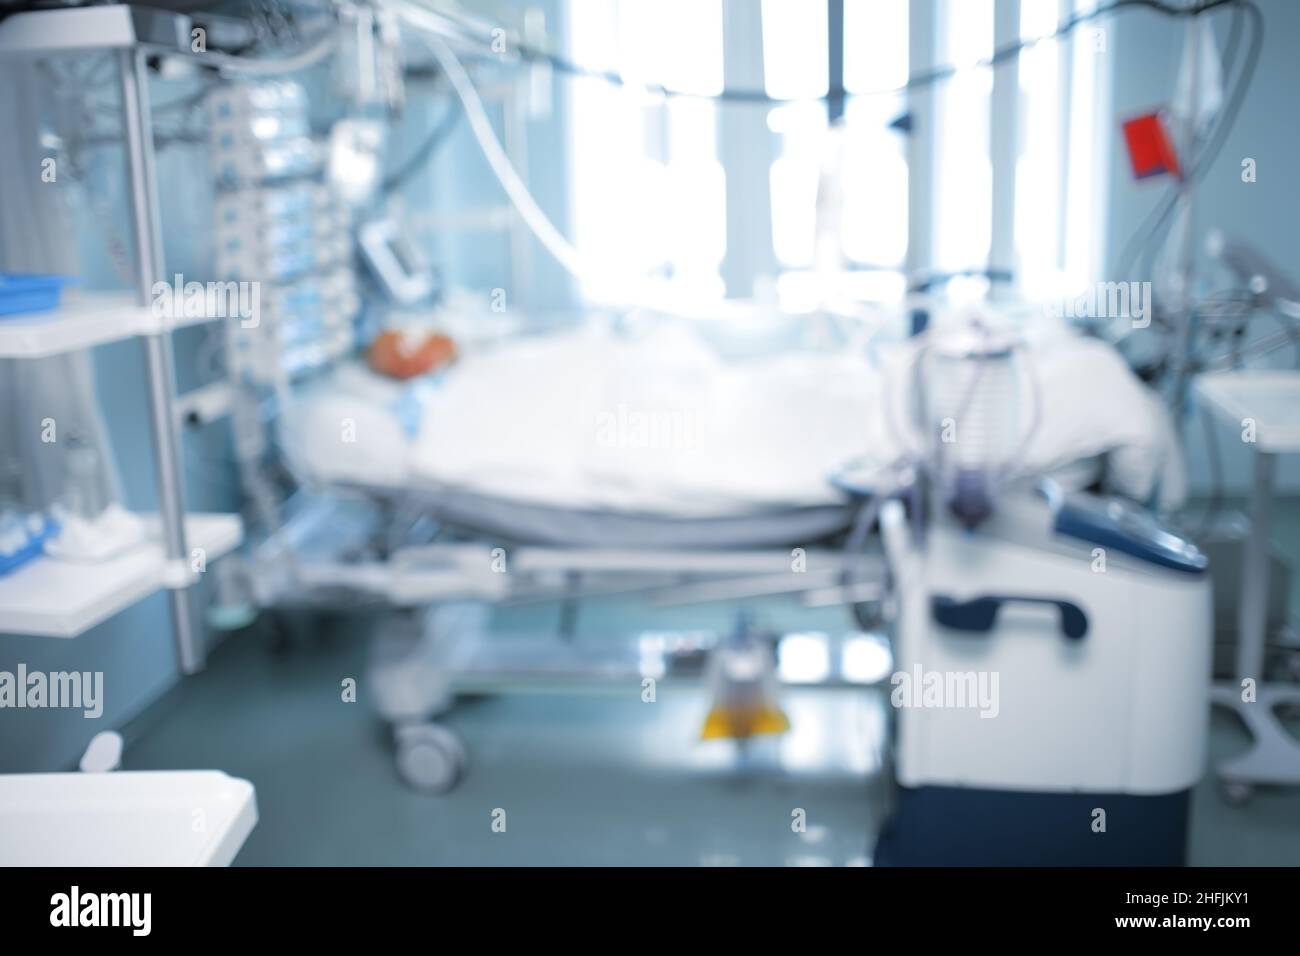 Hospital room interior with patient bed and modern digital equipment, unfocused background. Stock Photo